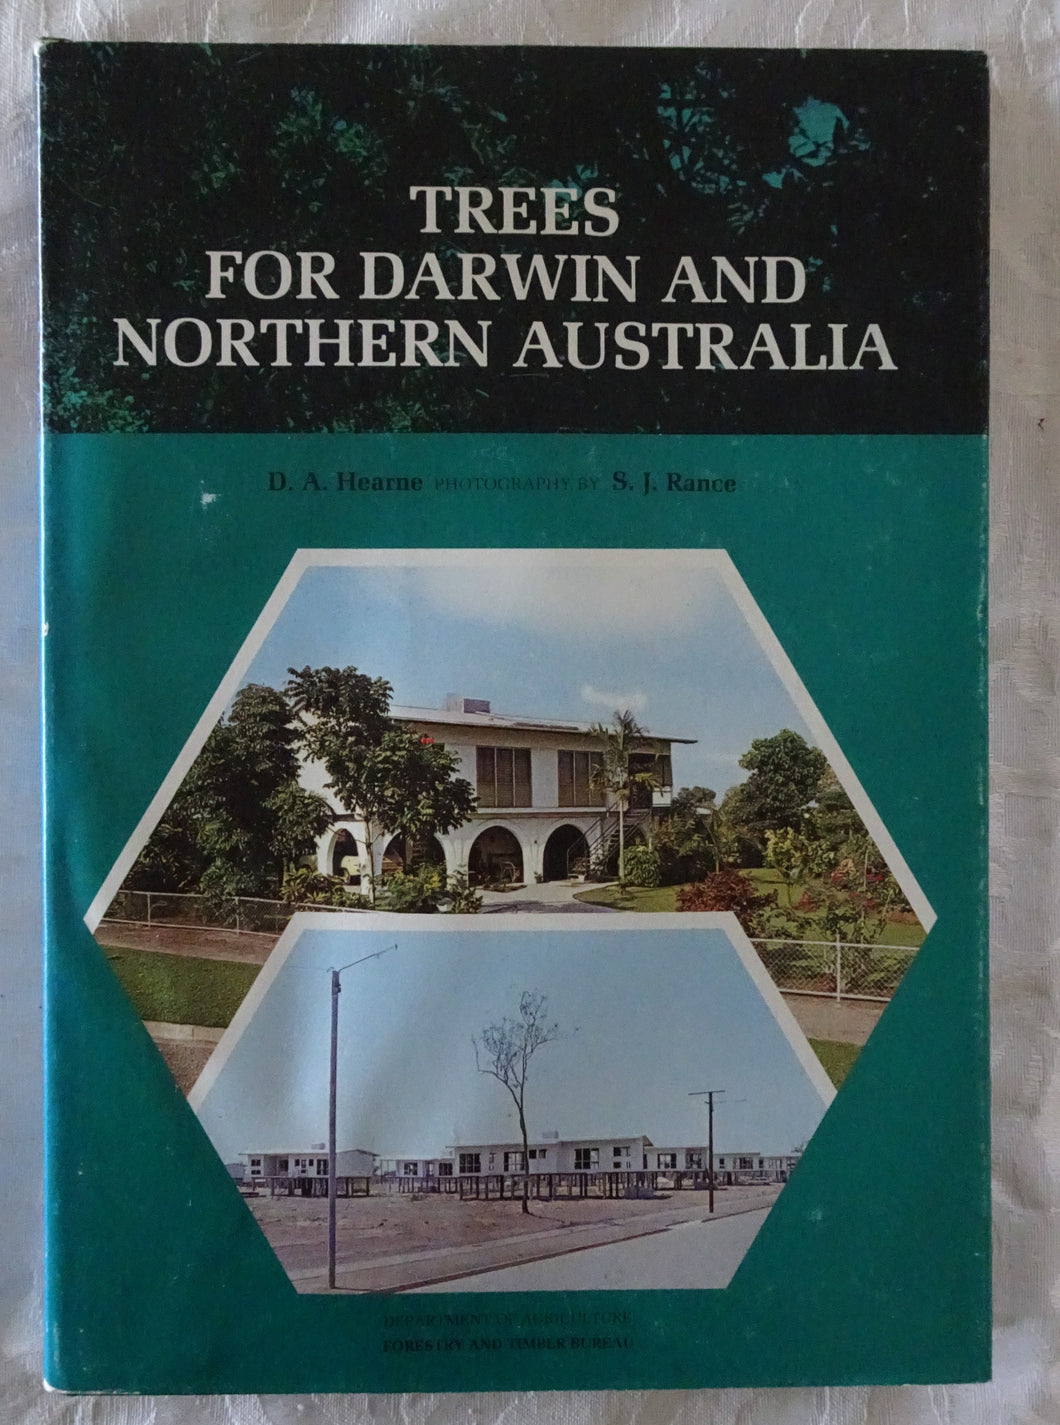 Trees For Darwin and Northern Australia  by D. A. Hearne